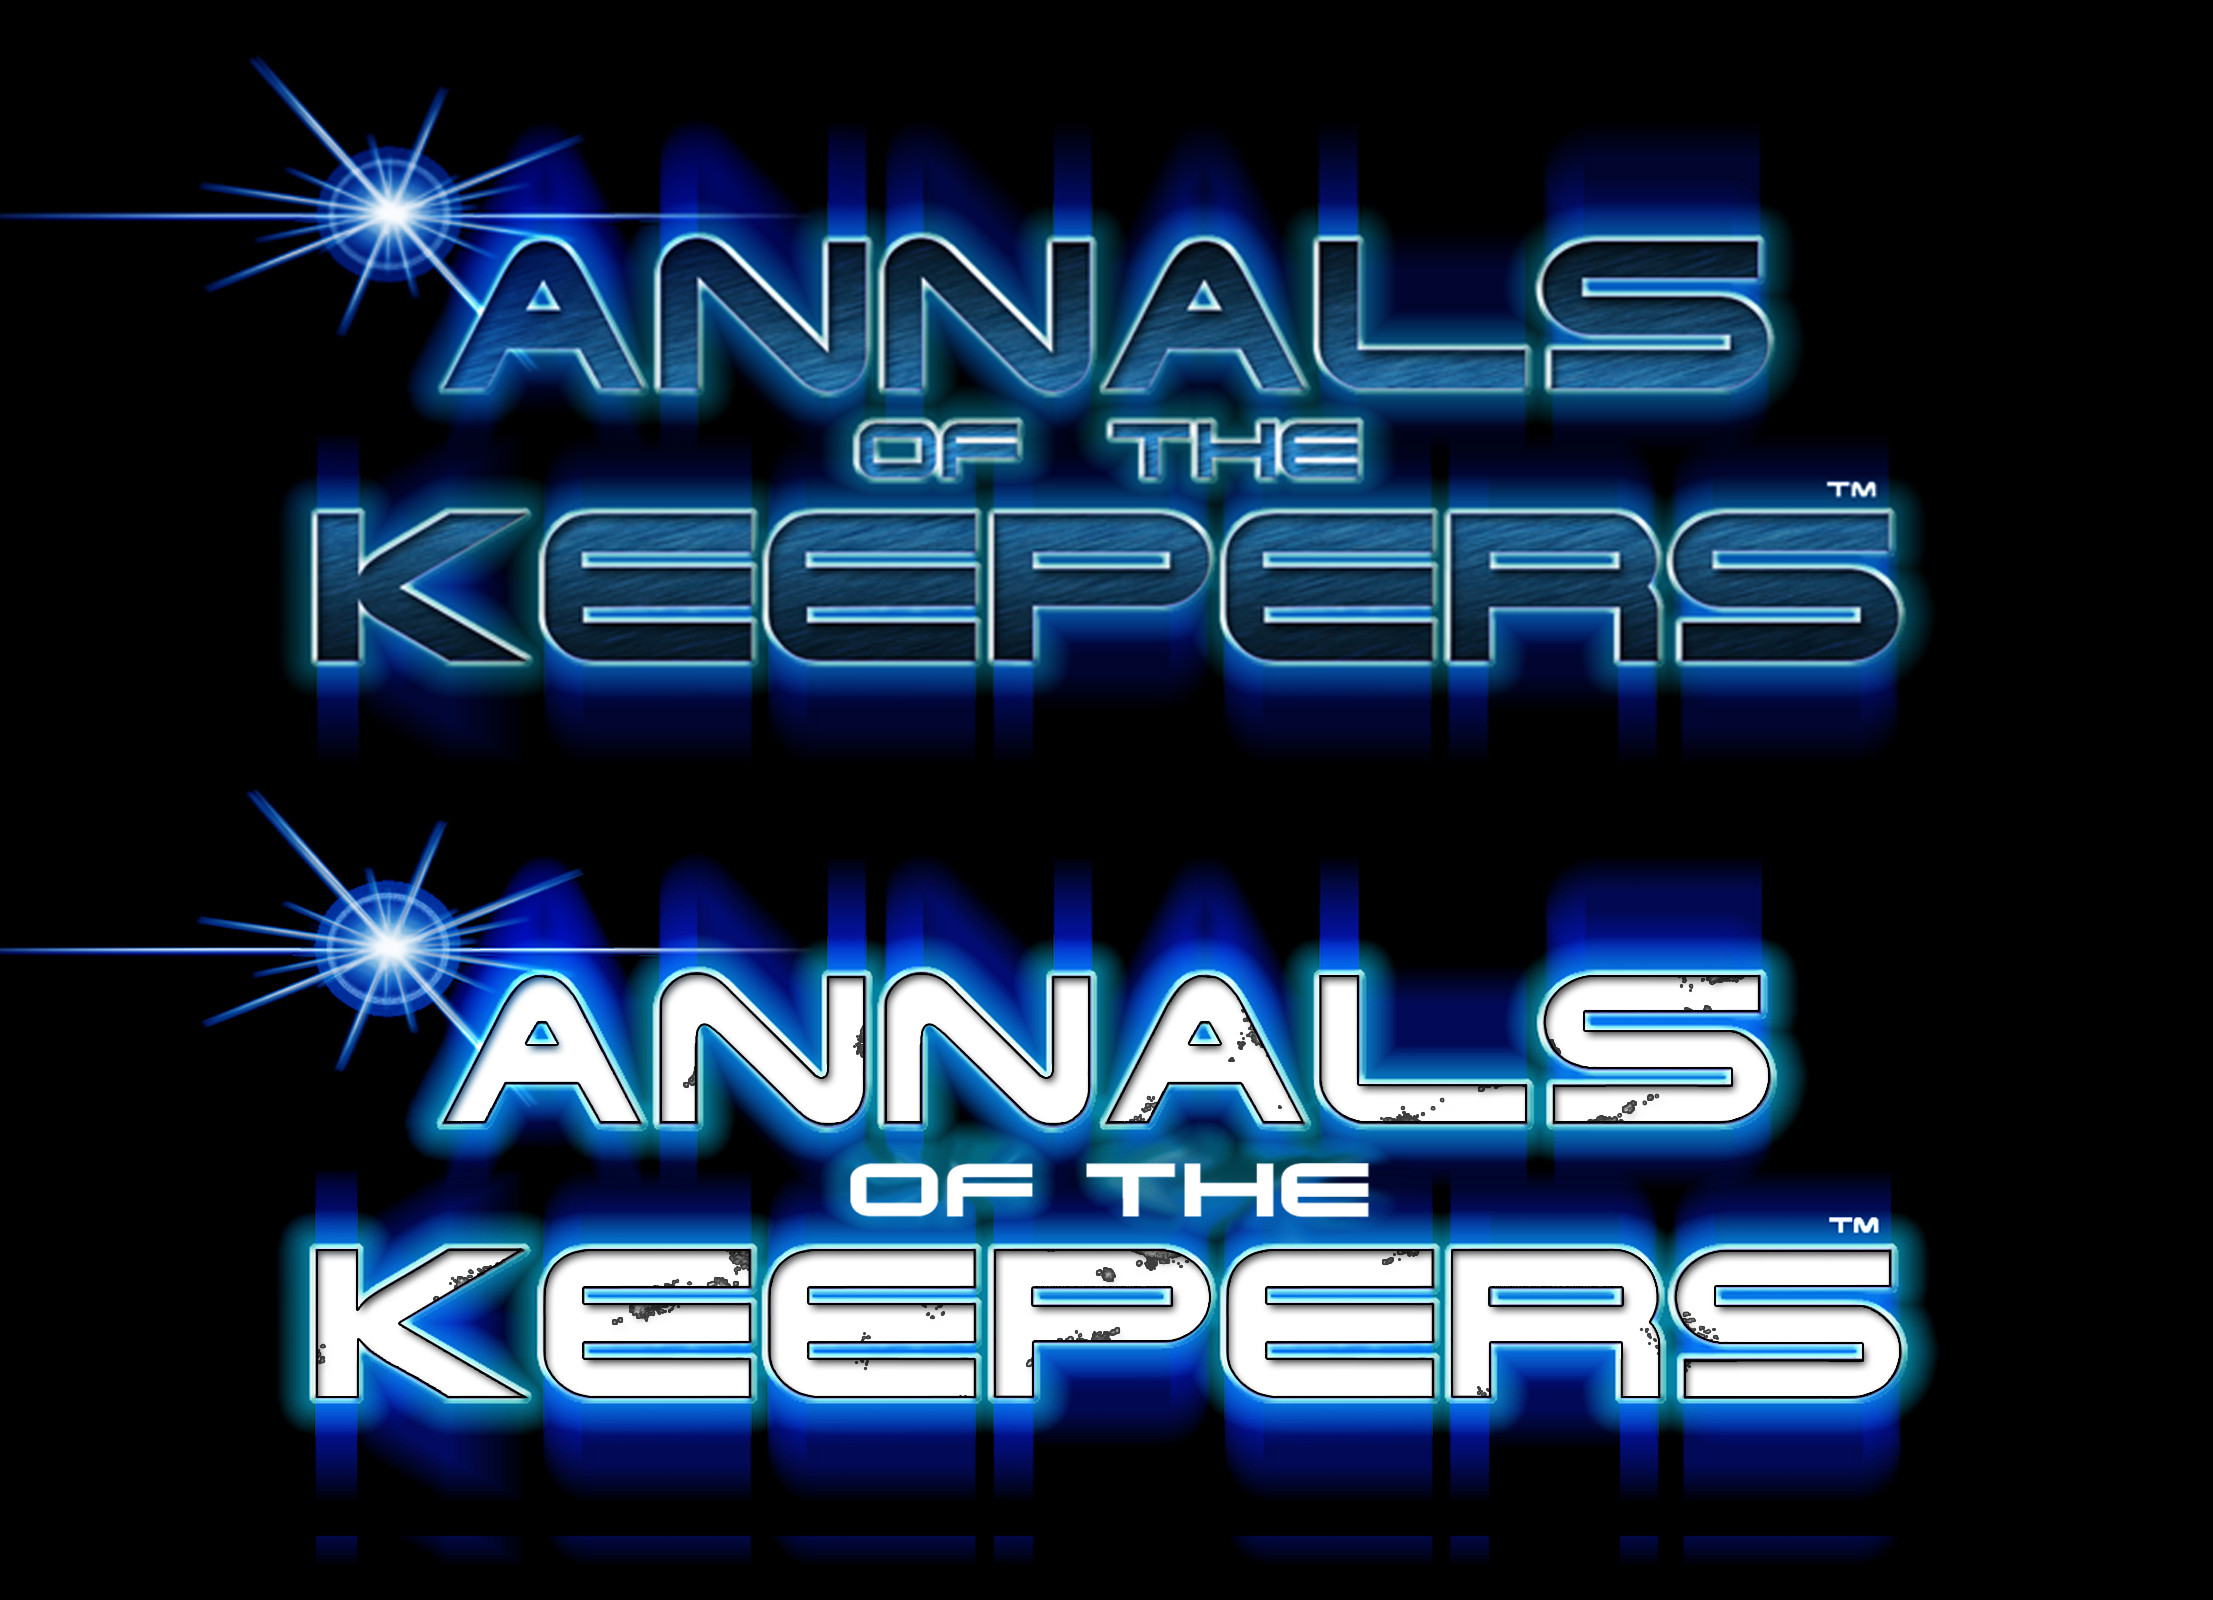 Annals of the Keepers
Graphic novel logo